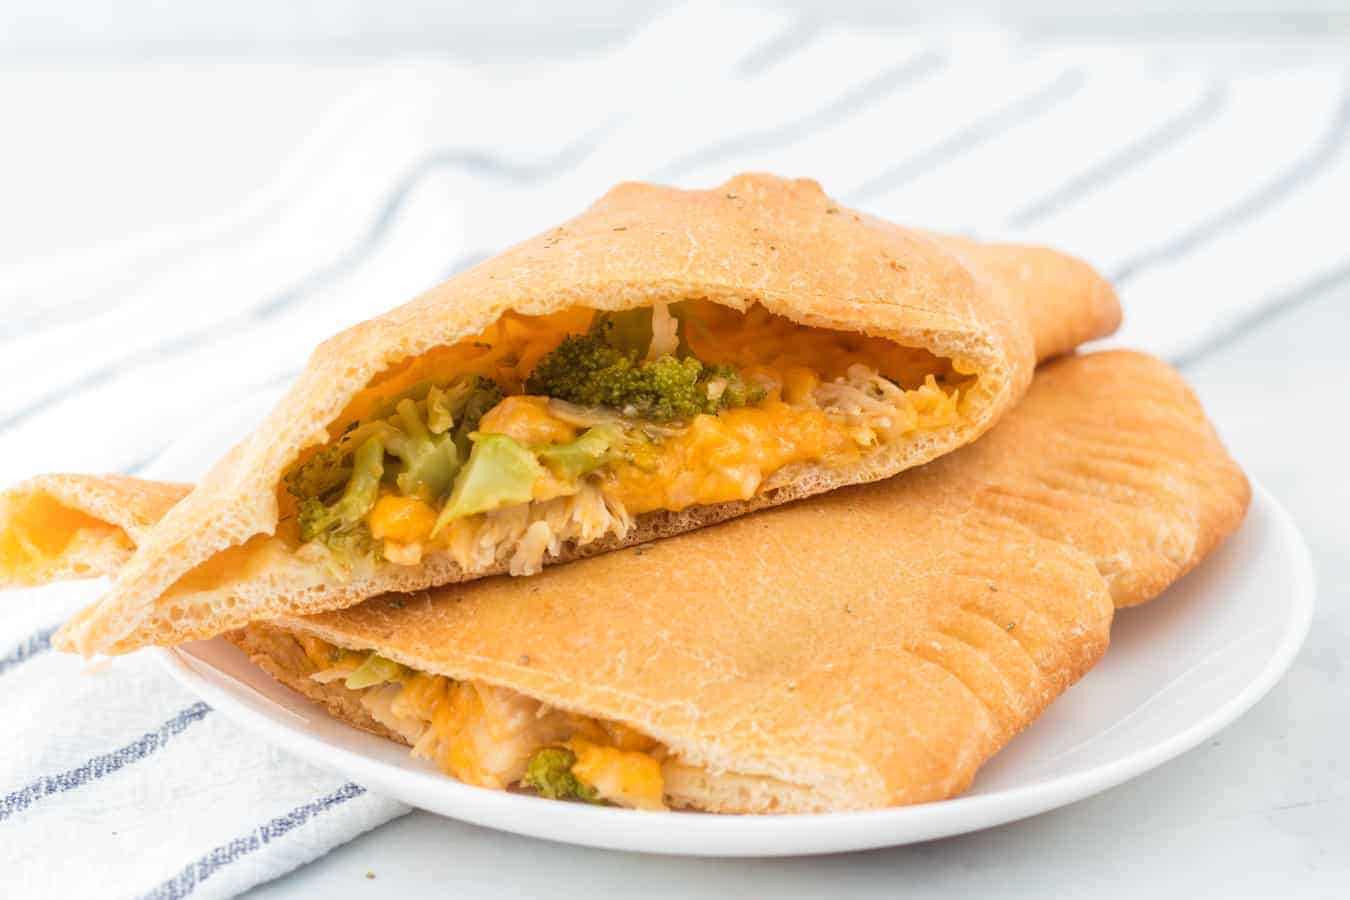 Cheesy chicken and broccoli calzones are gooey bites of pizza-reminiscent goodness that are easy to make and enjoy!